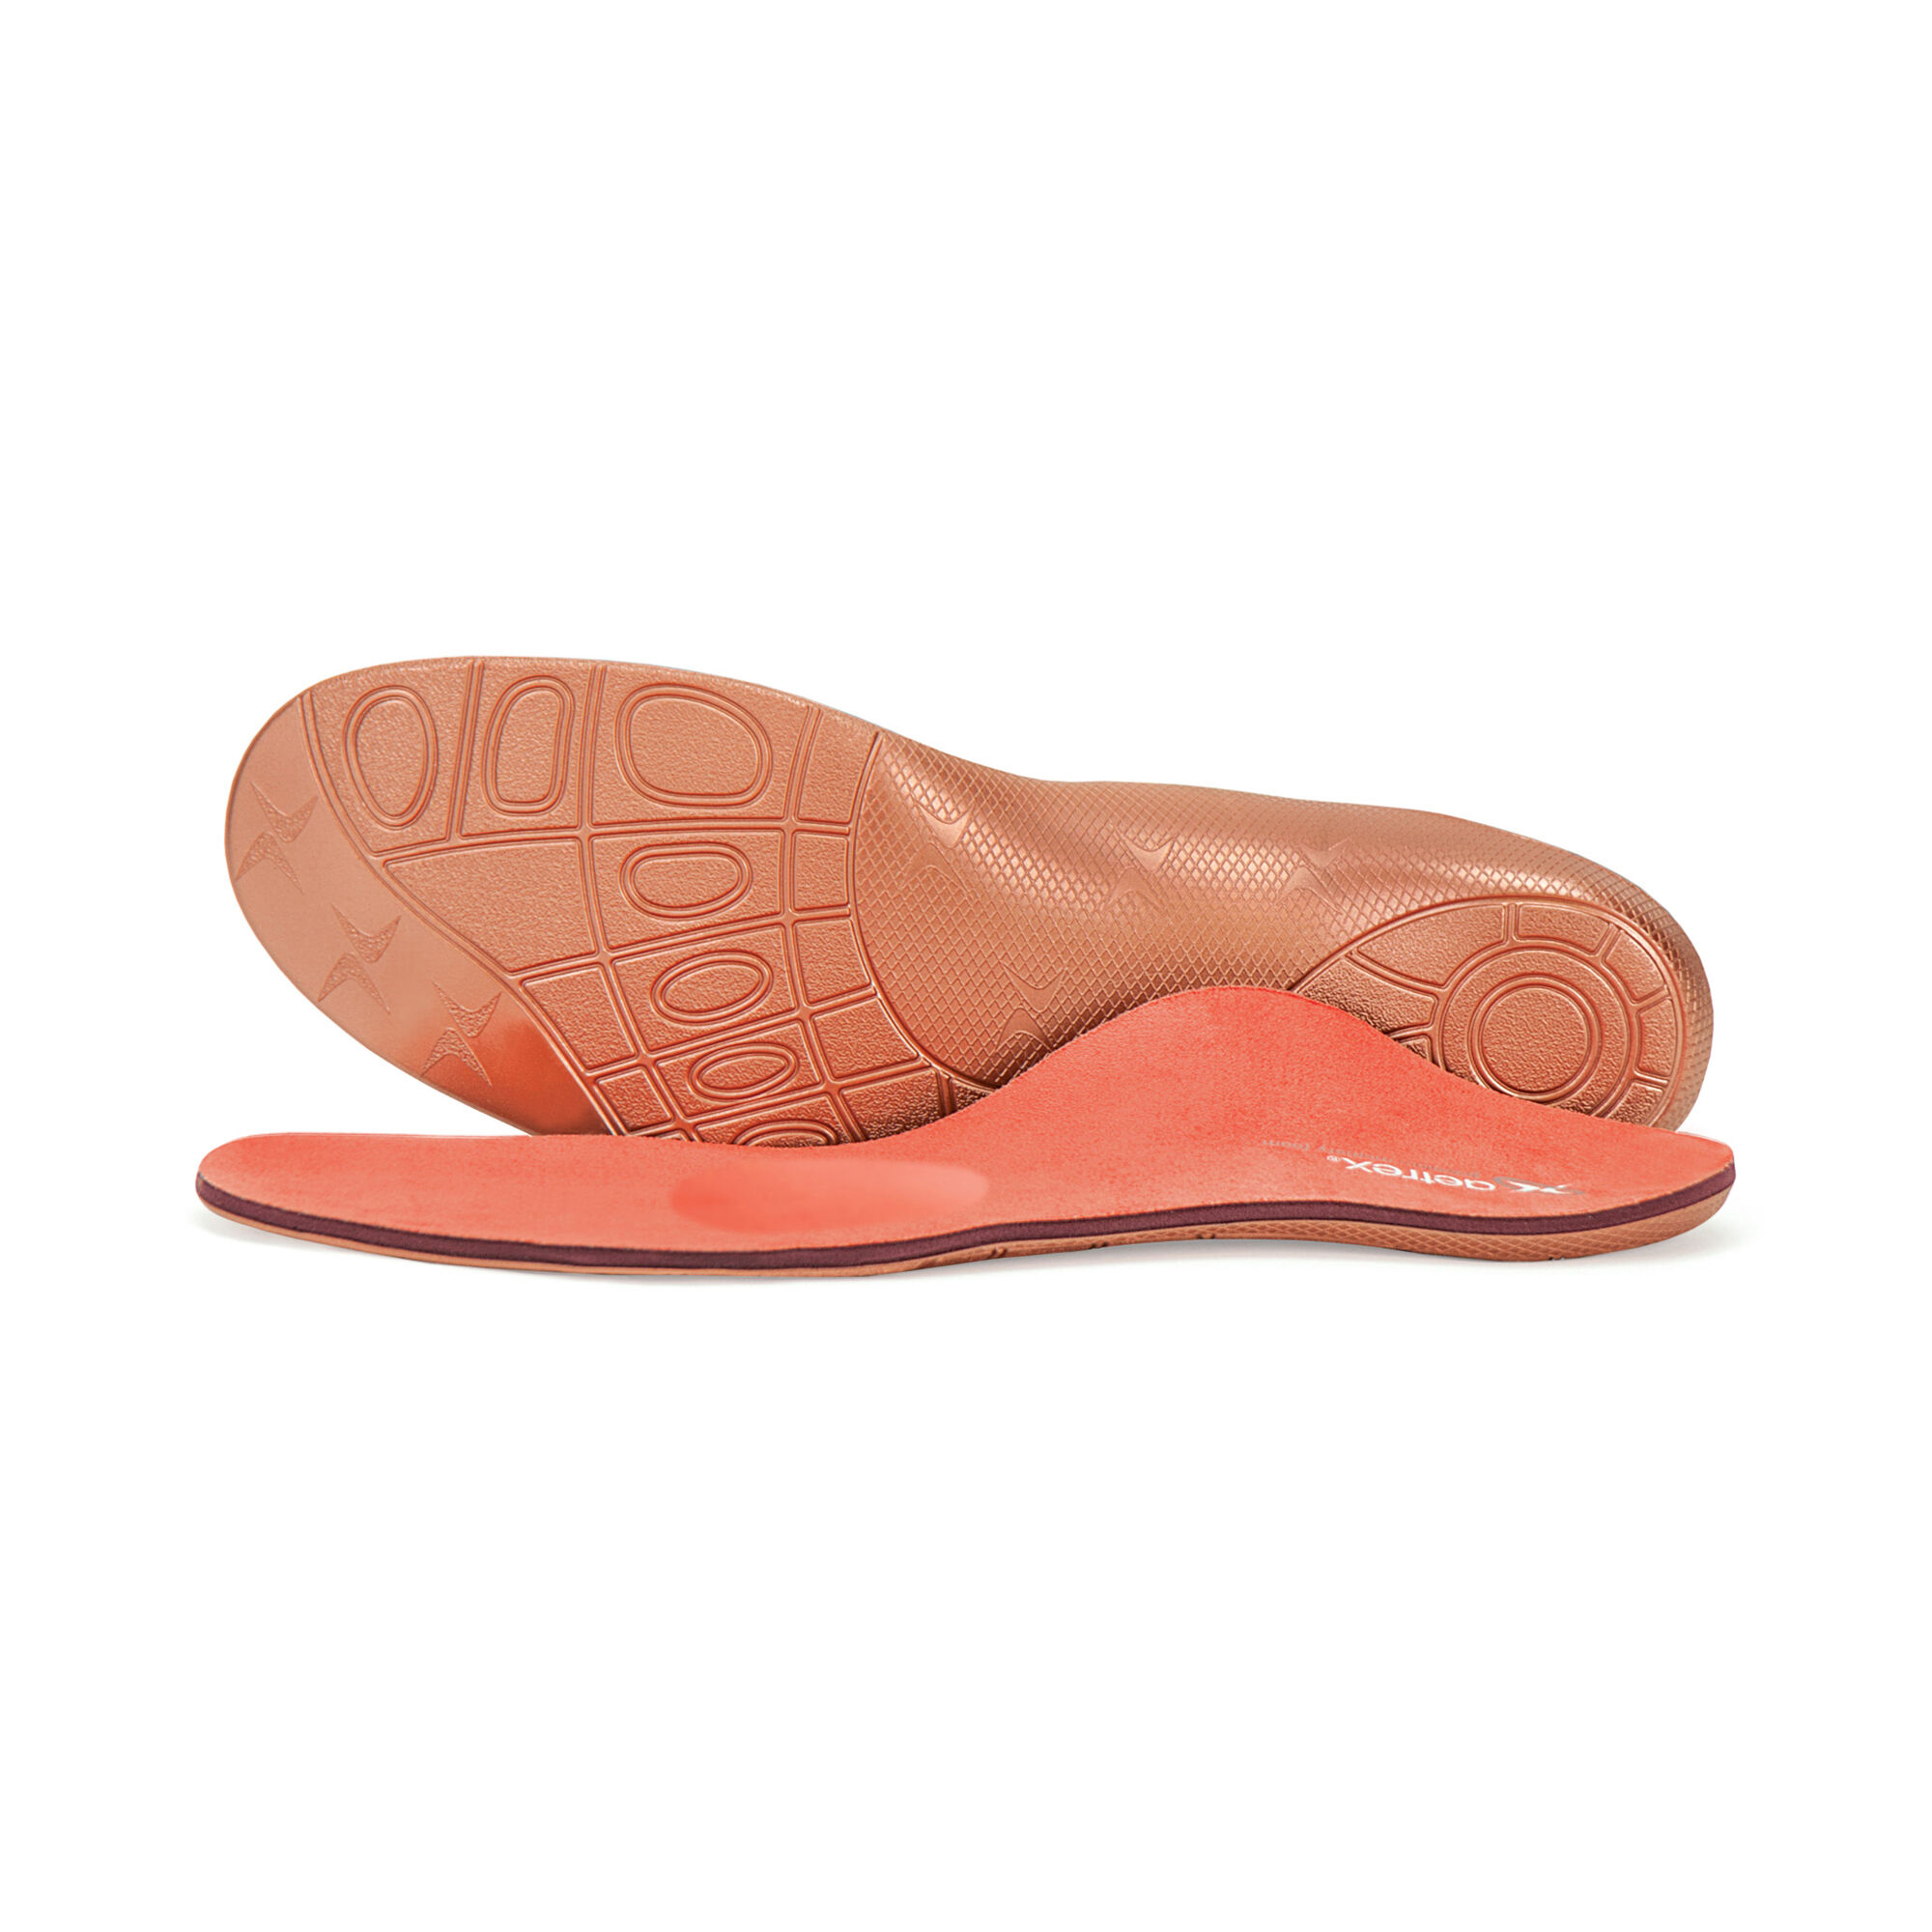 high arch insoles with metatarsal pad